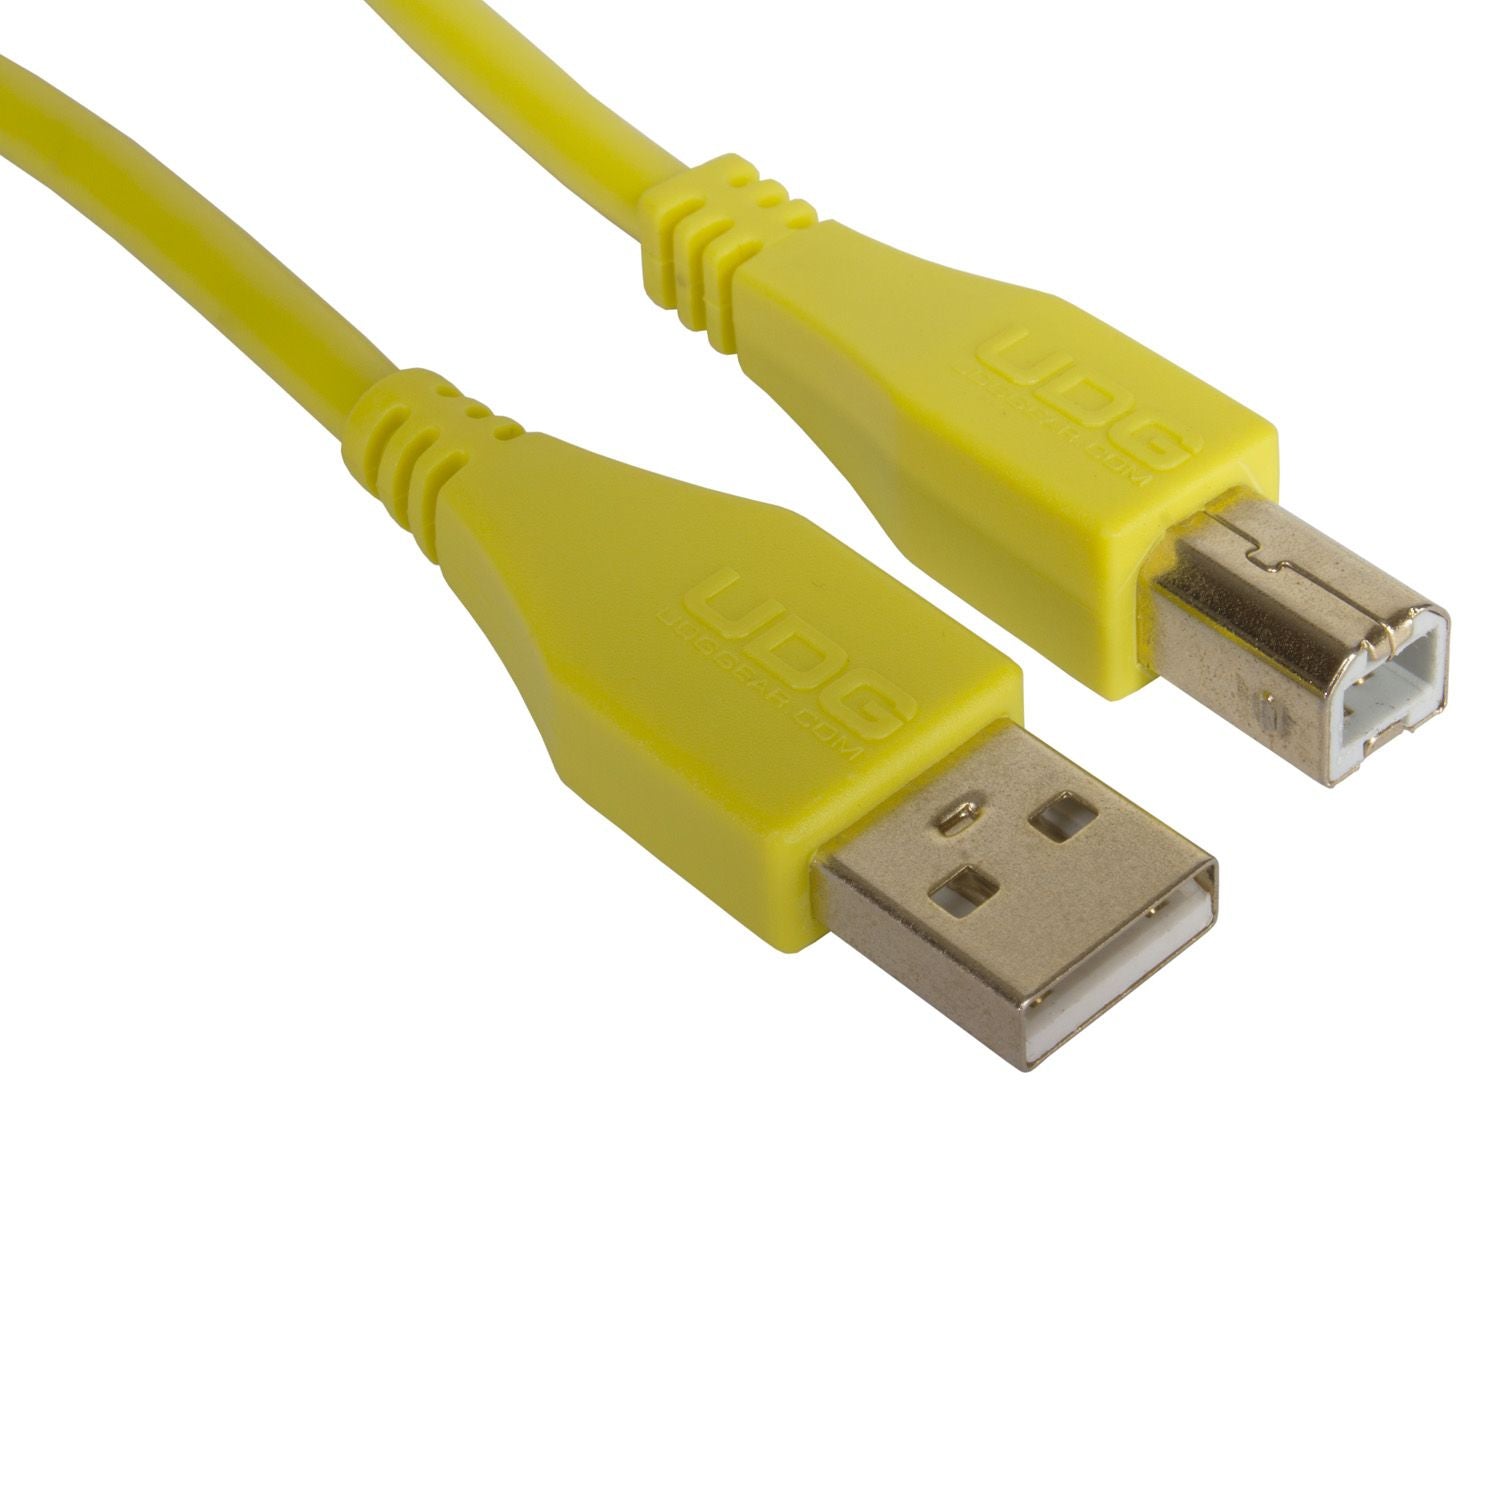 UDG USB Cable A-B 1m Yellow U95001YL